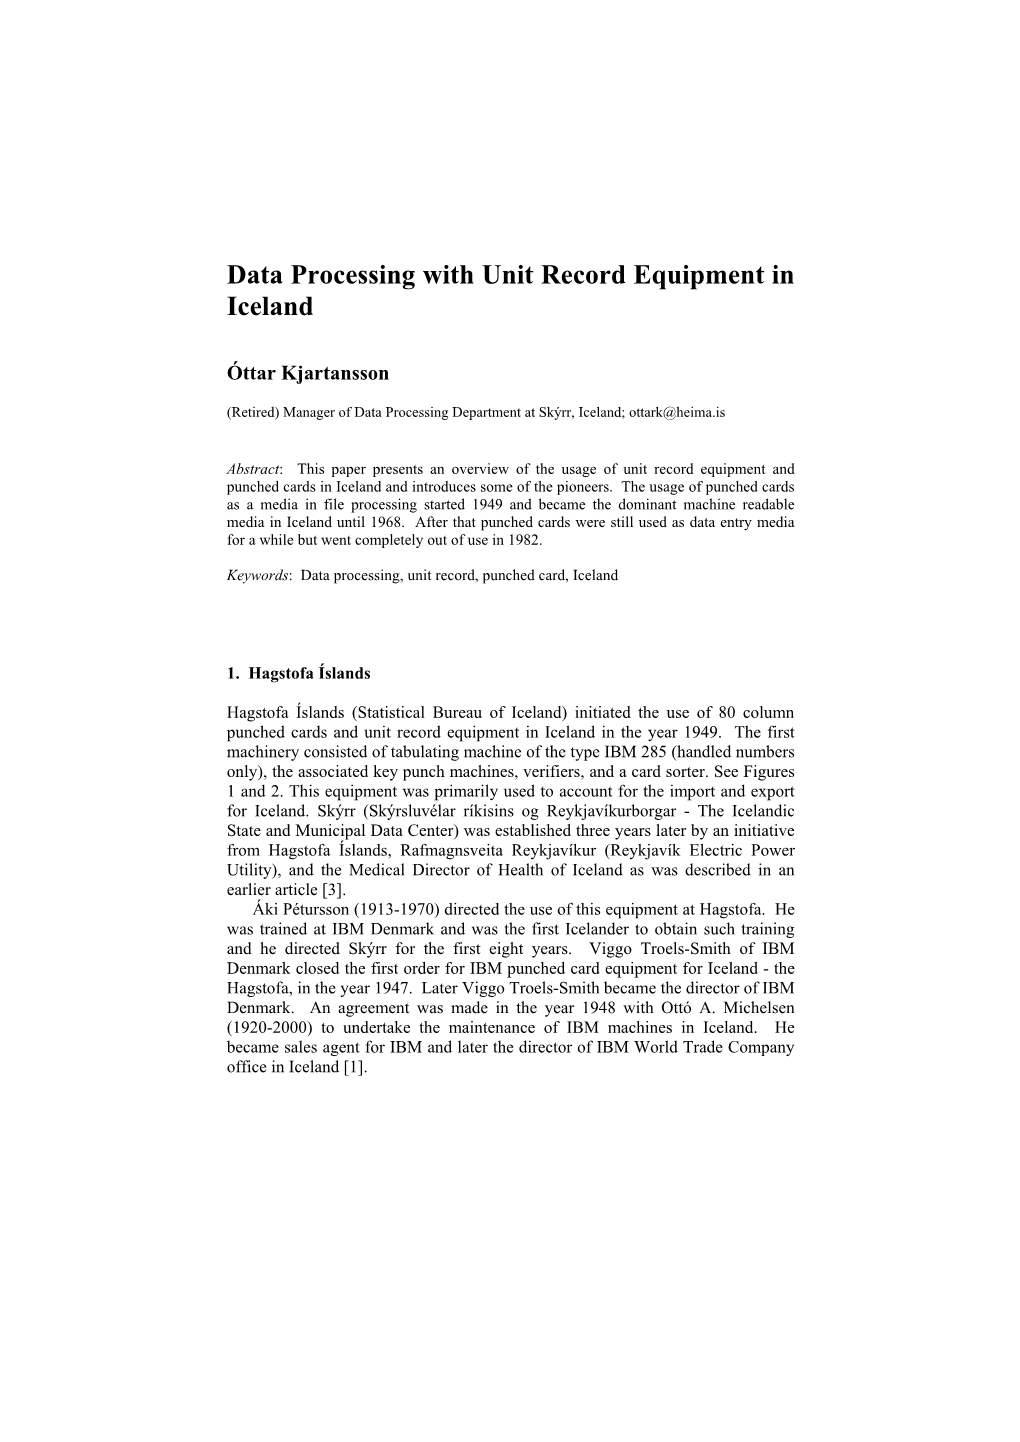 Data Processing with Unit Record Equipment in Iceland